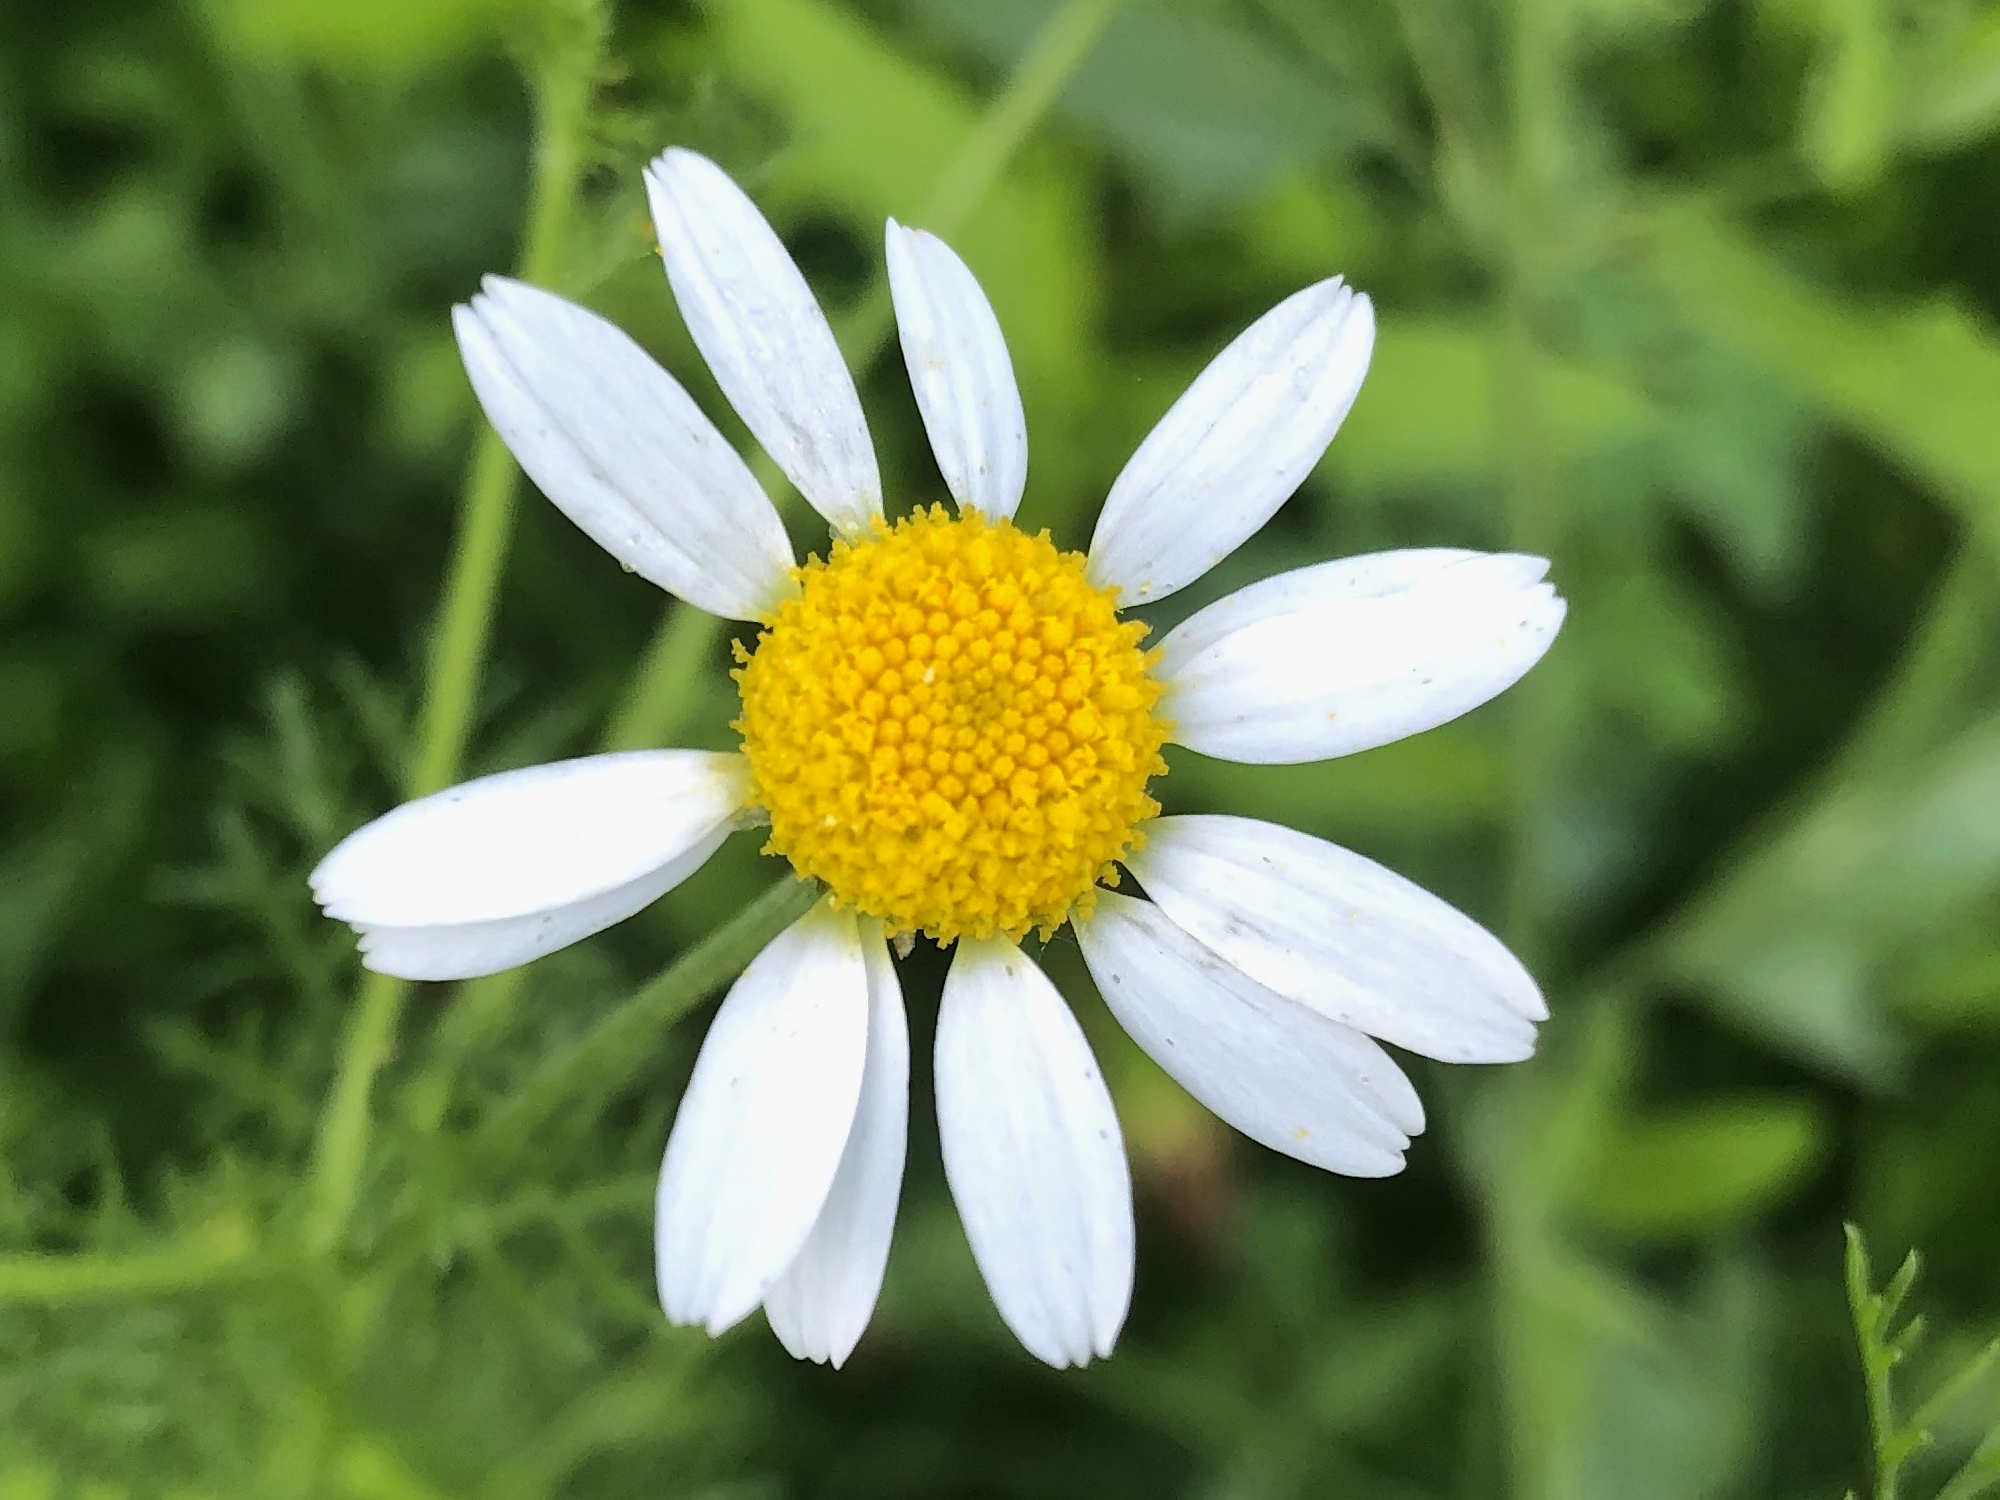 Chamomile in grass between Monroe Street sidewalk and Marion Dunn woods in Madison, Wisconsin on June 29, 2019.